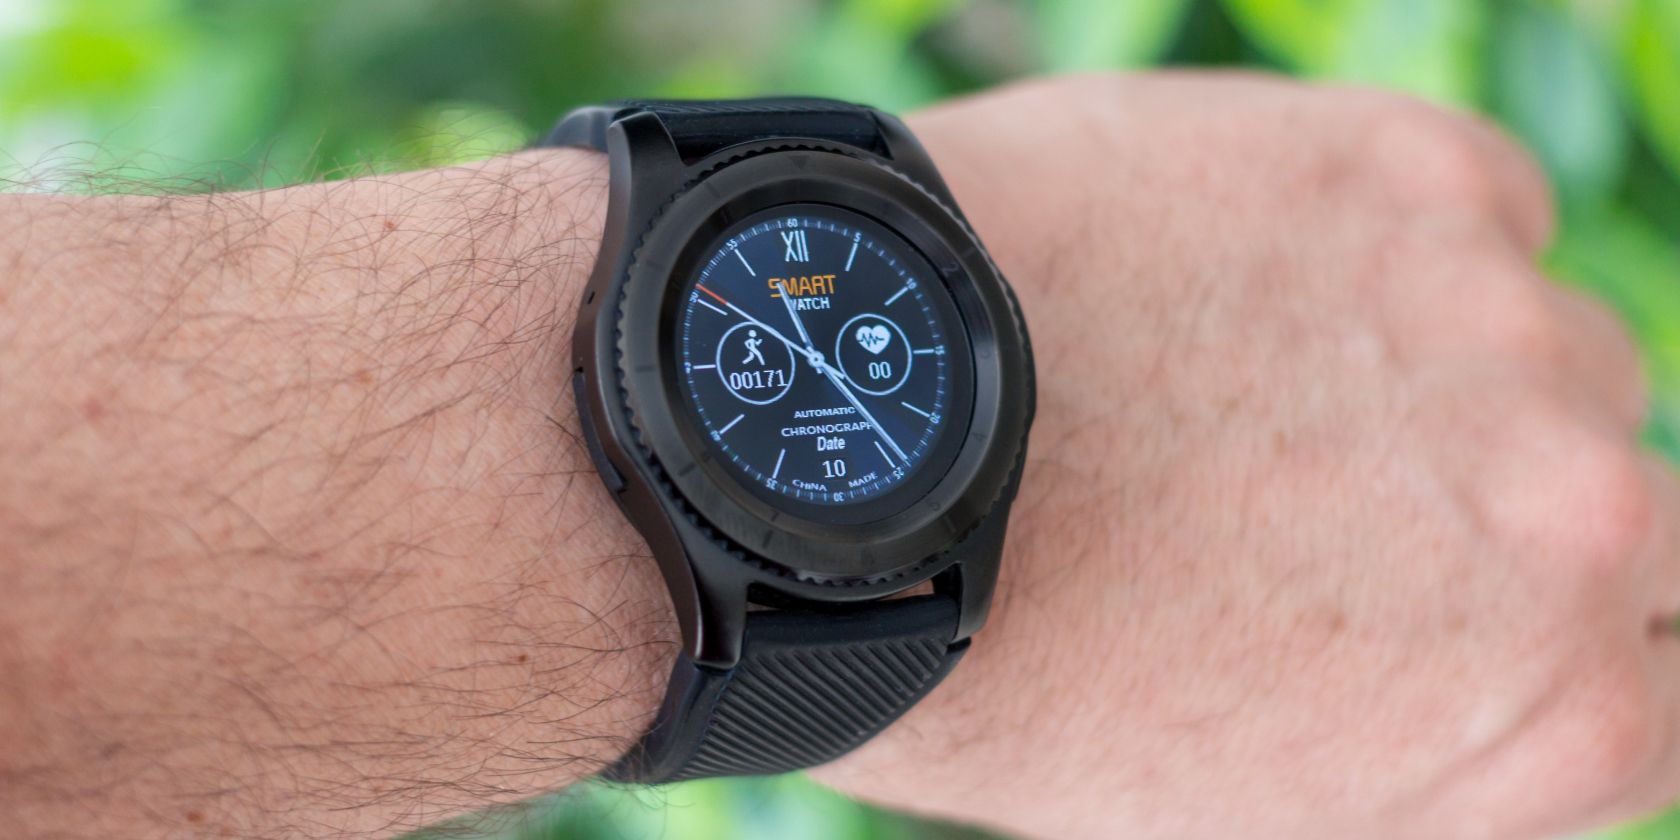 Smartwatch being worn on a hairy armed person